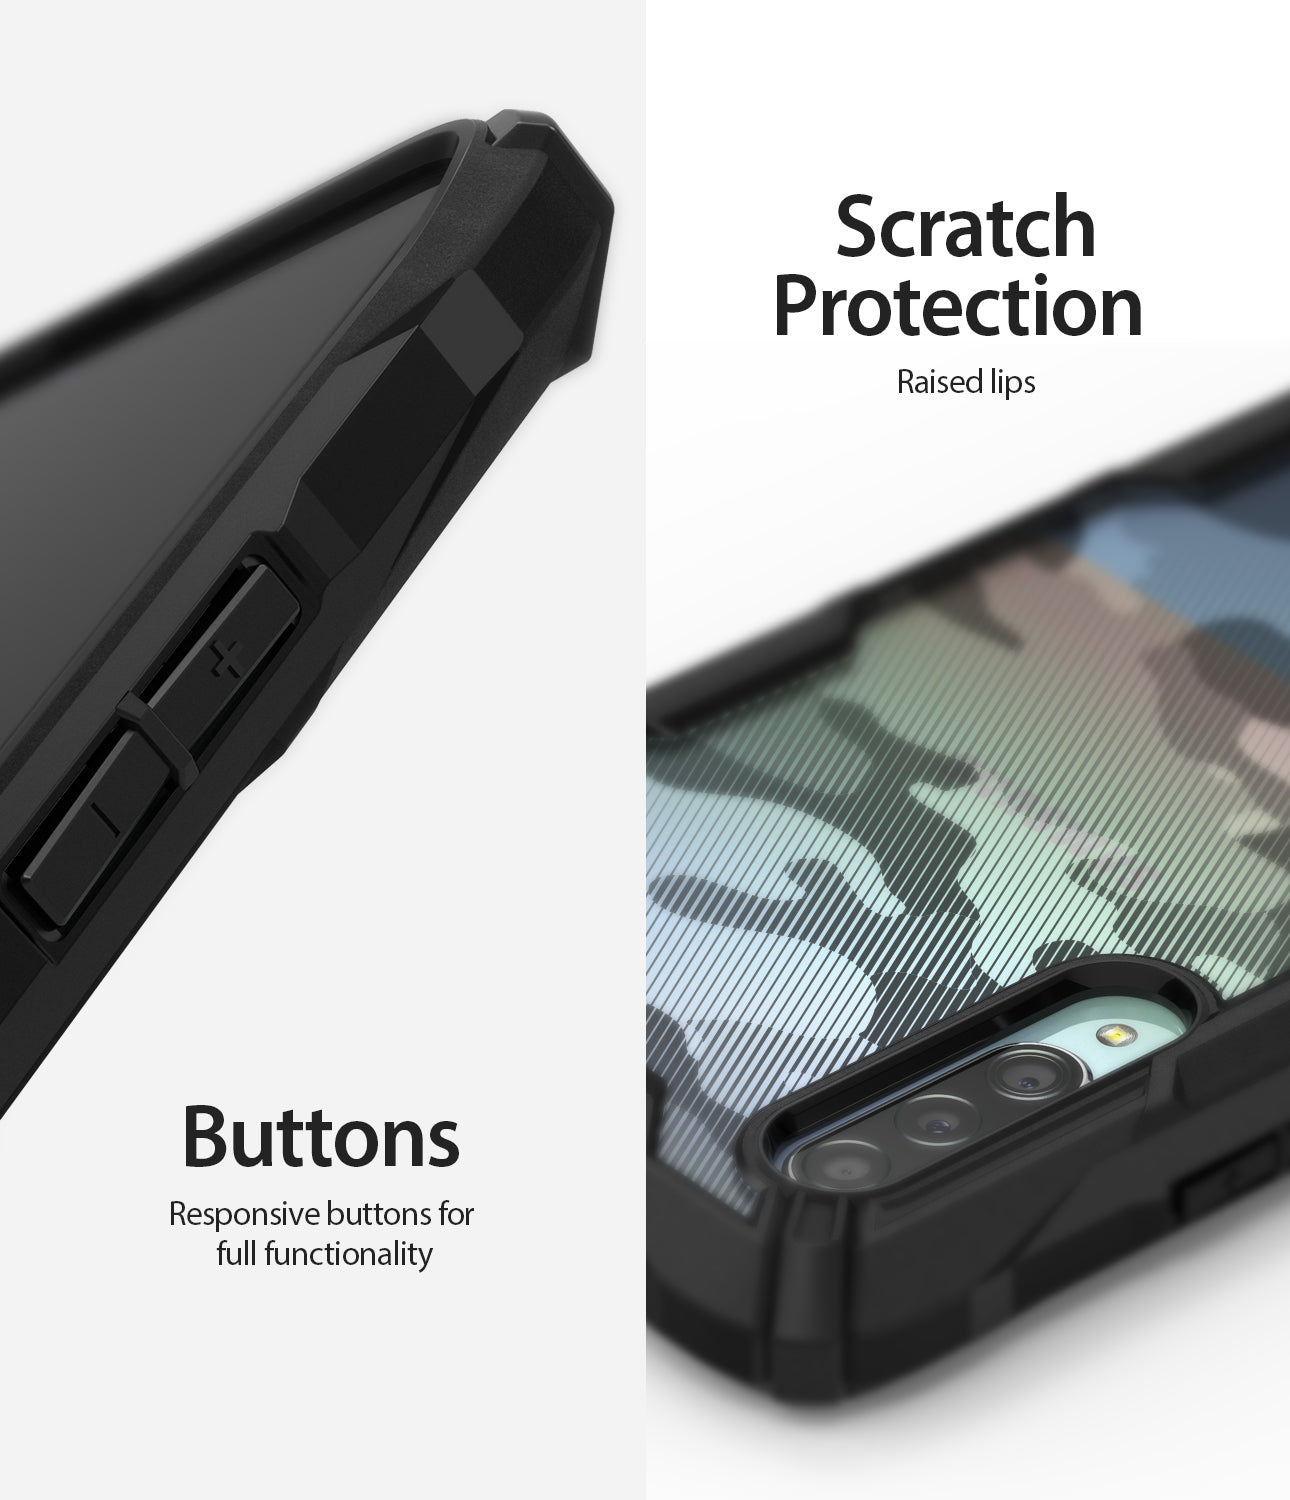 scratch resistant surface with responsive button cutouts